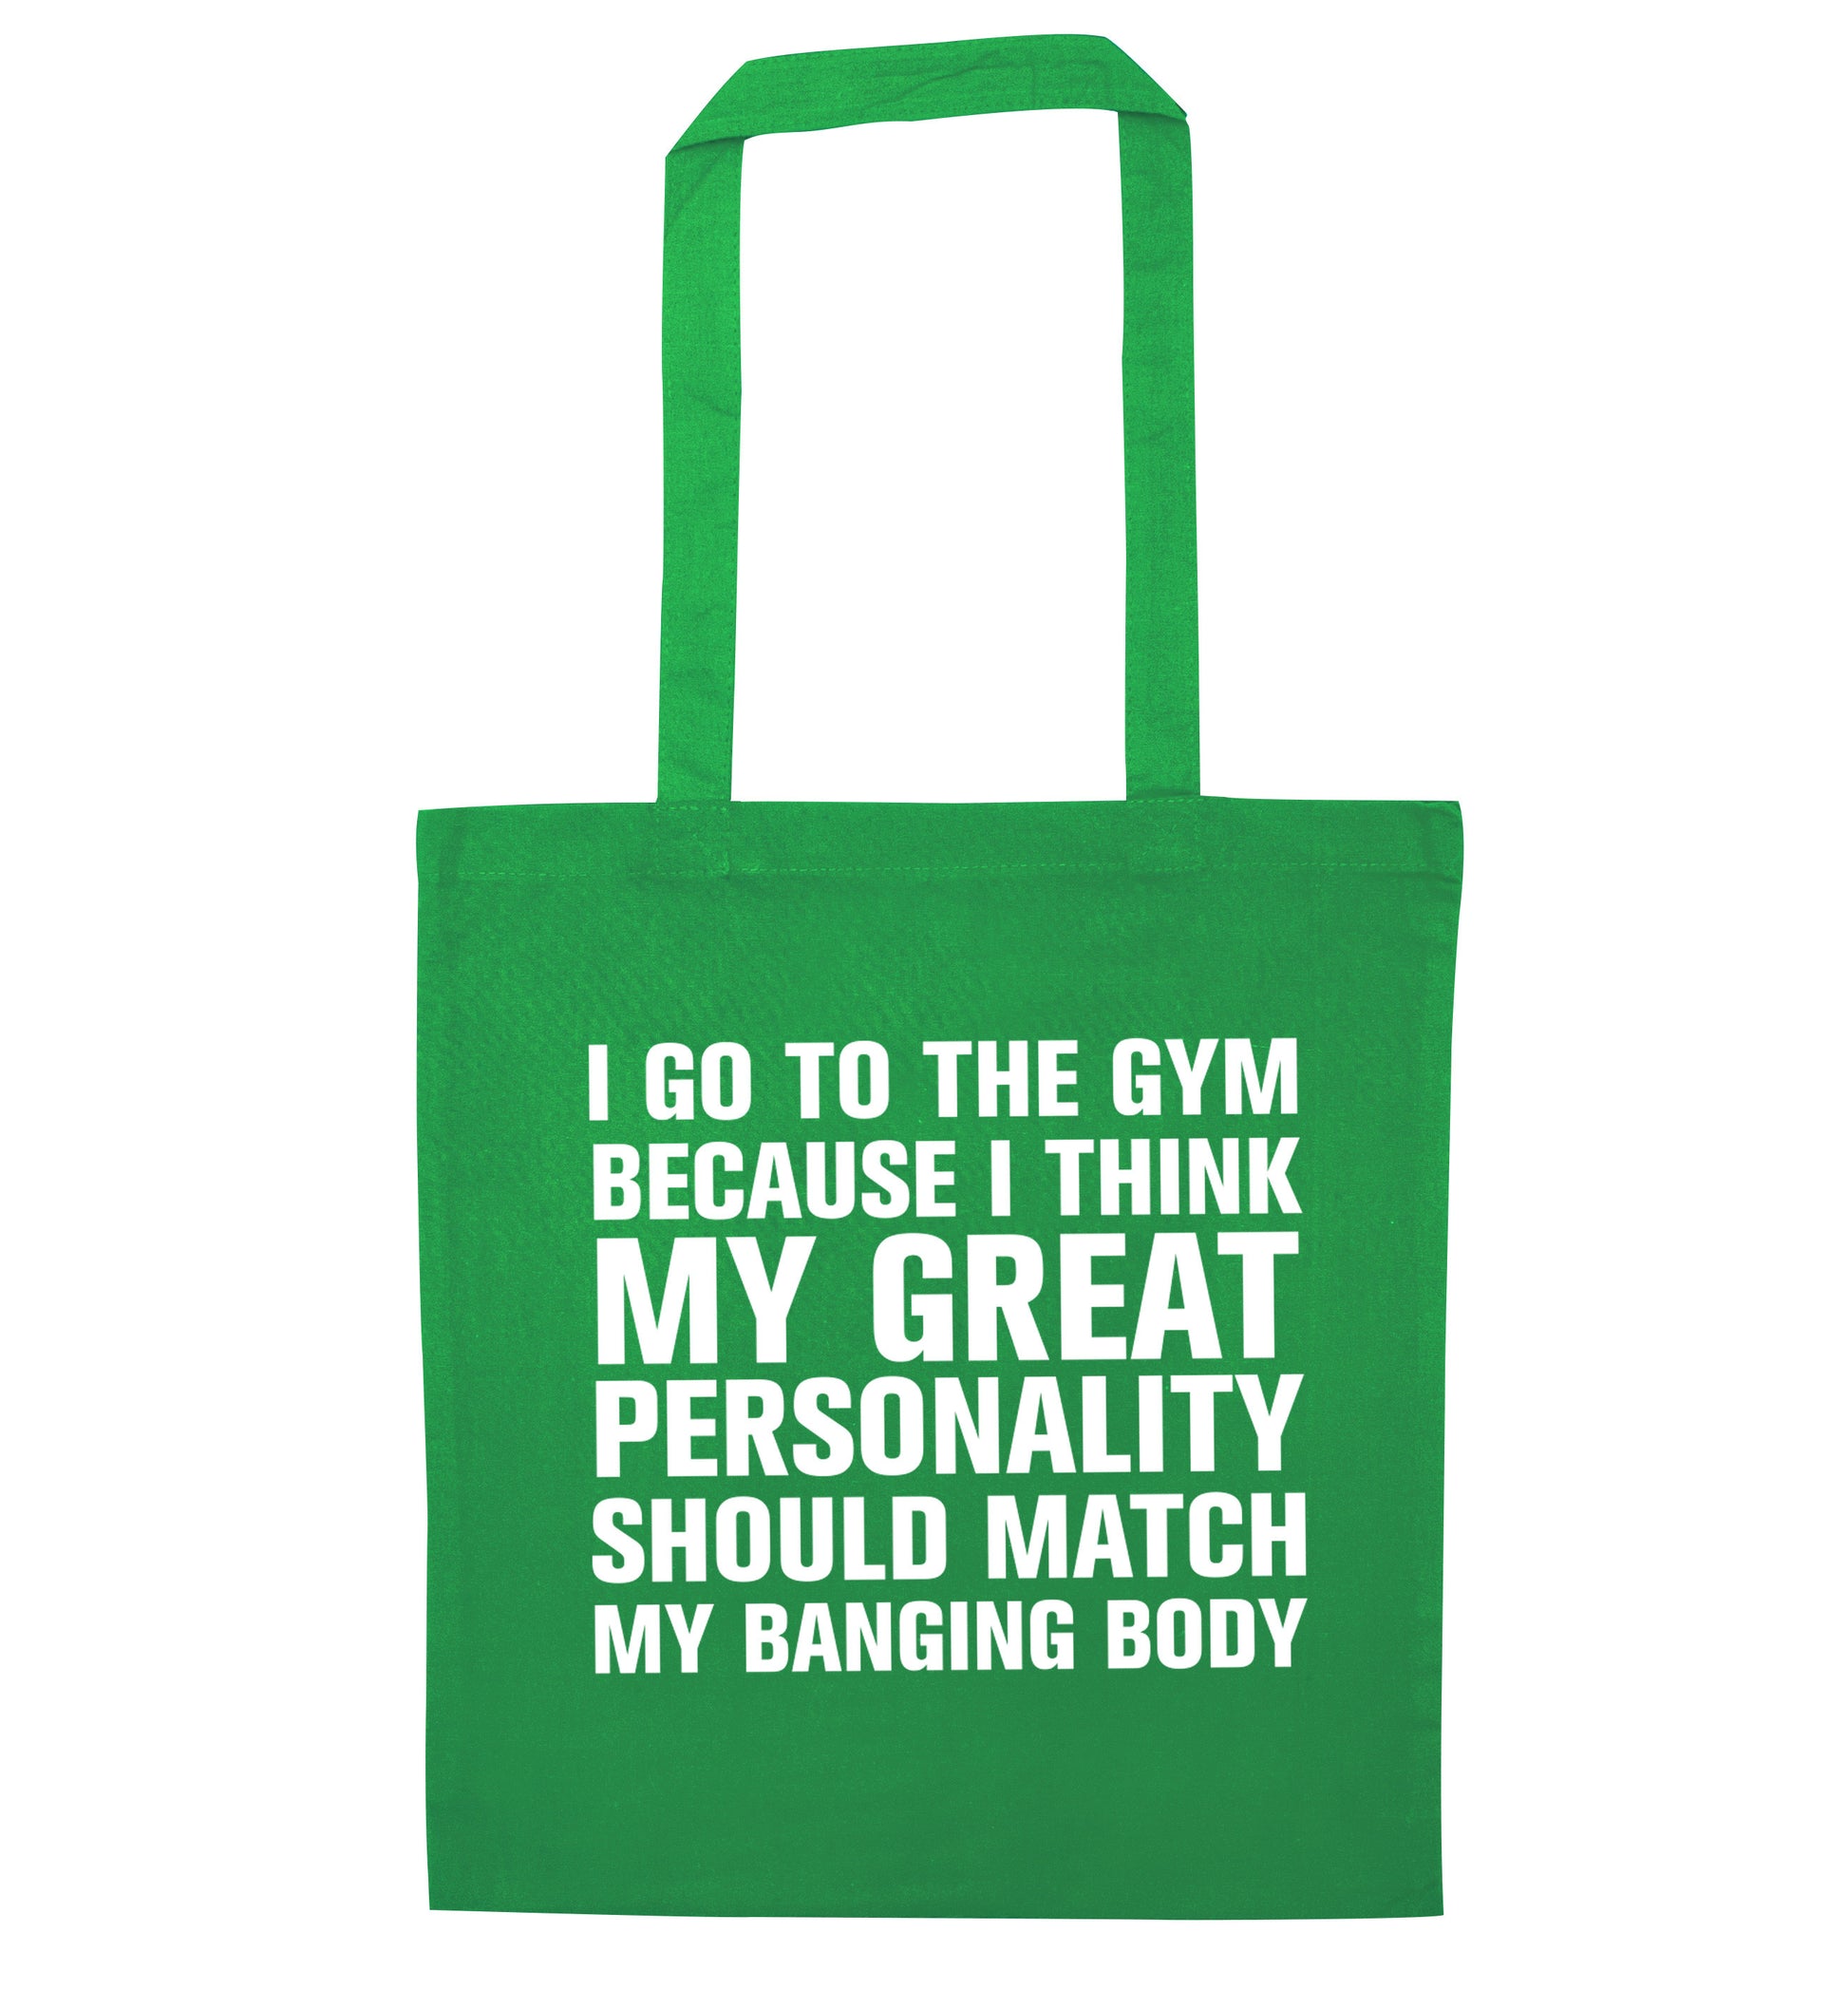 I go to the gym because I think my great personality should match my banging body green tote bag